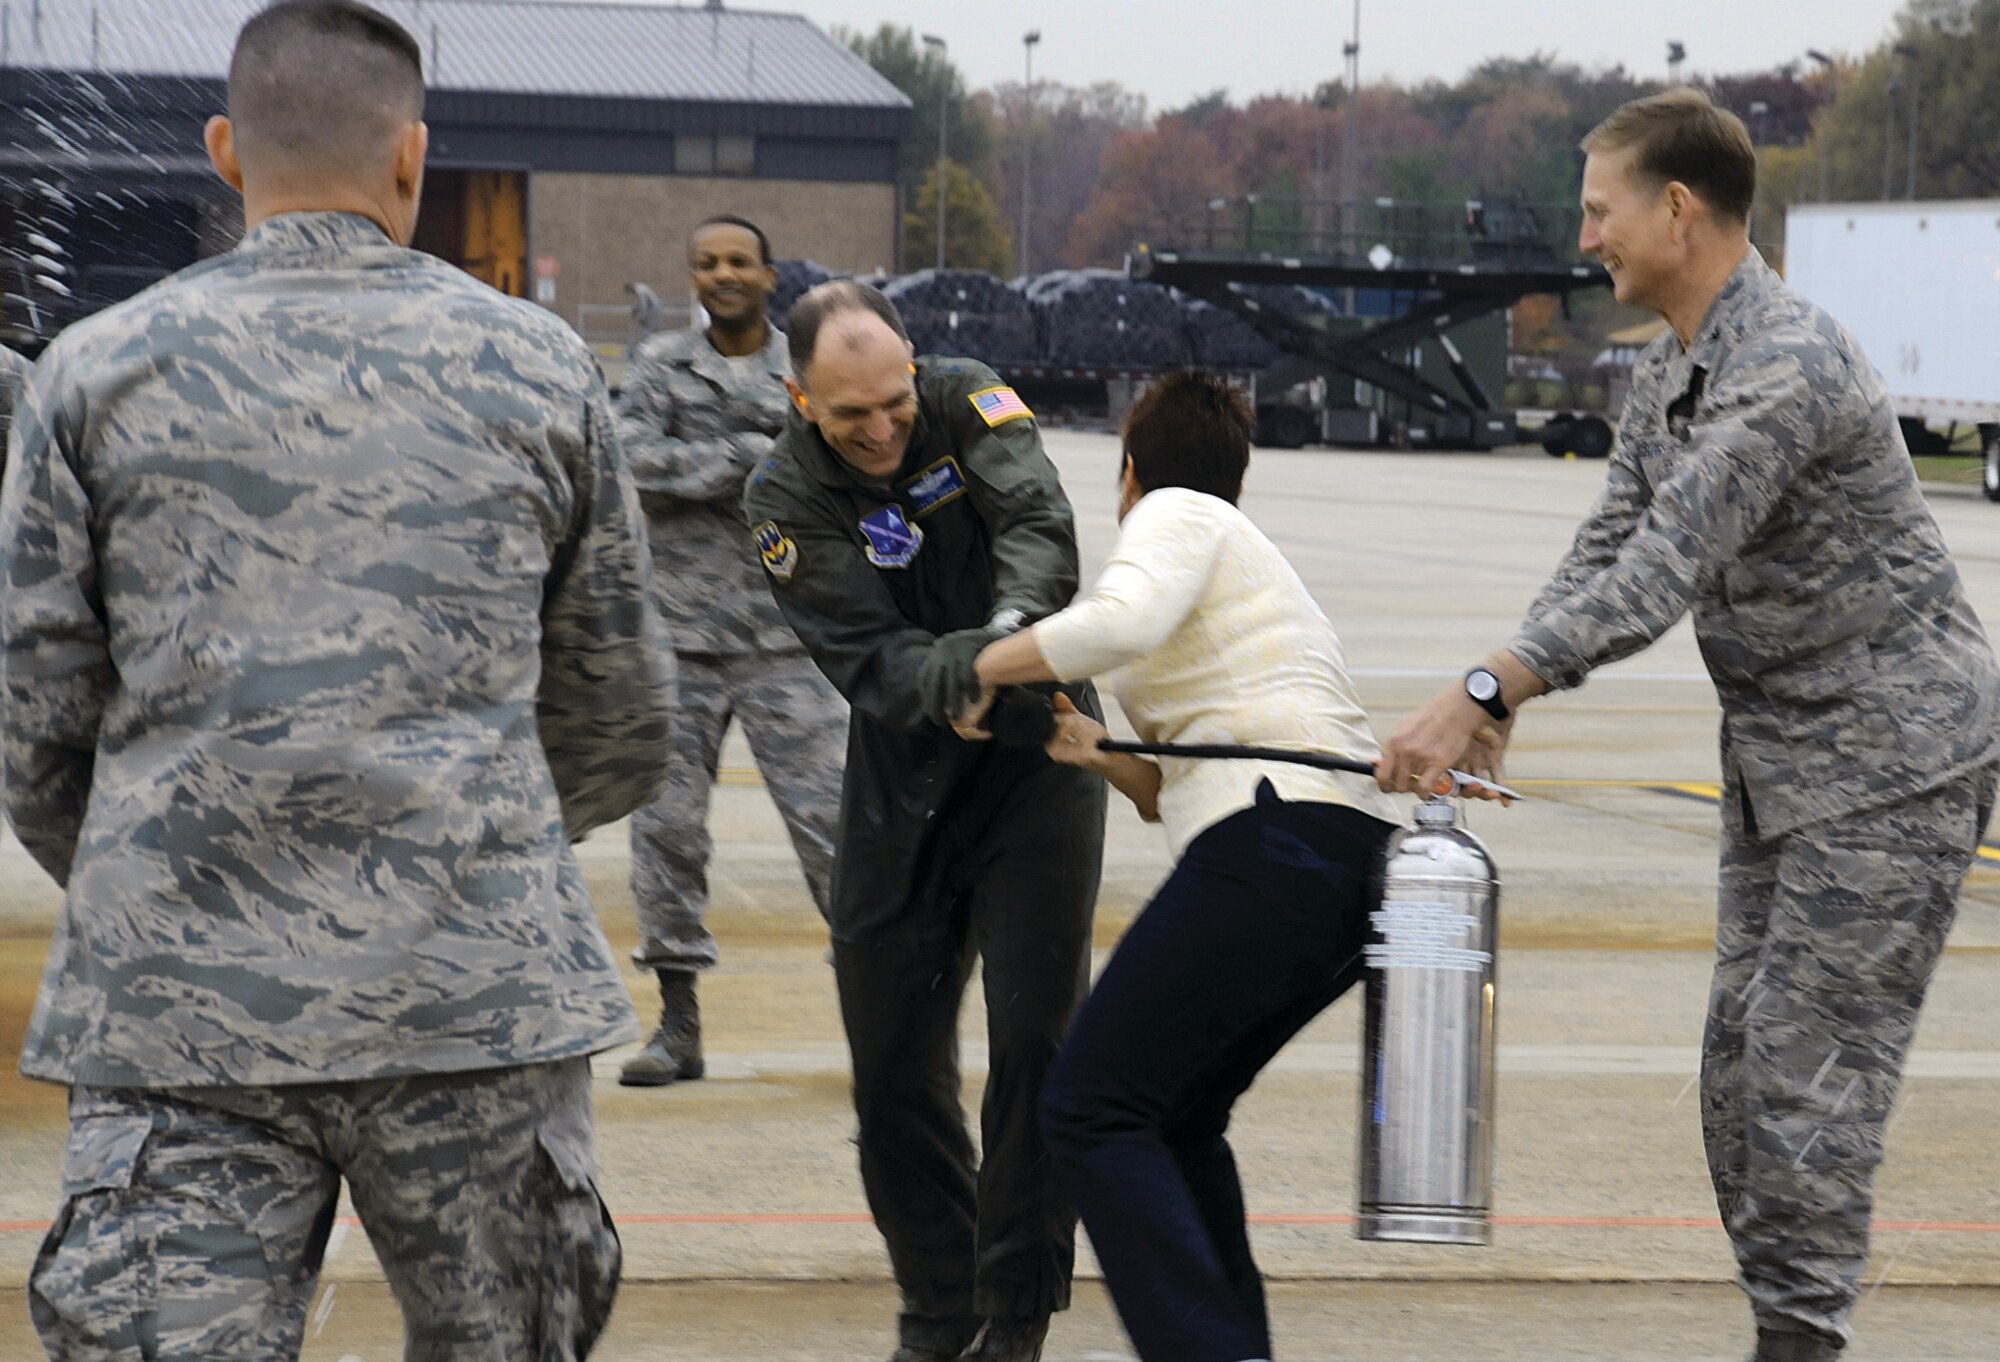 Maj. gen. Ralph Jodice, Air Force District of Washington commander wrestles with his wife, Judy, over a fire extinguisher she and Col. Phillip Gibbons, AFDW vice commander, were using to try to douse him with after his final flight Tuesday at Joint base Andrews-NAF Washington, Md. 
General Jodice was welcomed back to Andrews by base leaders after flying over the Pentagon and in Capitol airspace, with a tradition that dates back to the vietnam war era, when pilots who completed 100 safe combat missions were doused down with fire hoses upon landing. On Wednesday, General Jodice is slated to pass the AFDW guidon to Maj. Gen. Darrell Jones during a change of command ceremony in Hagnar 3 at Andrews.